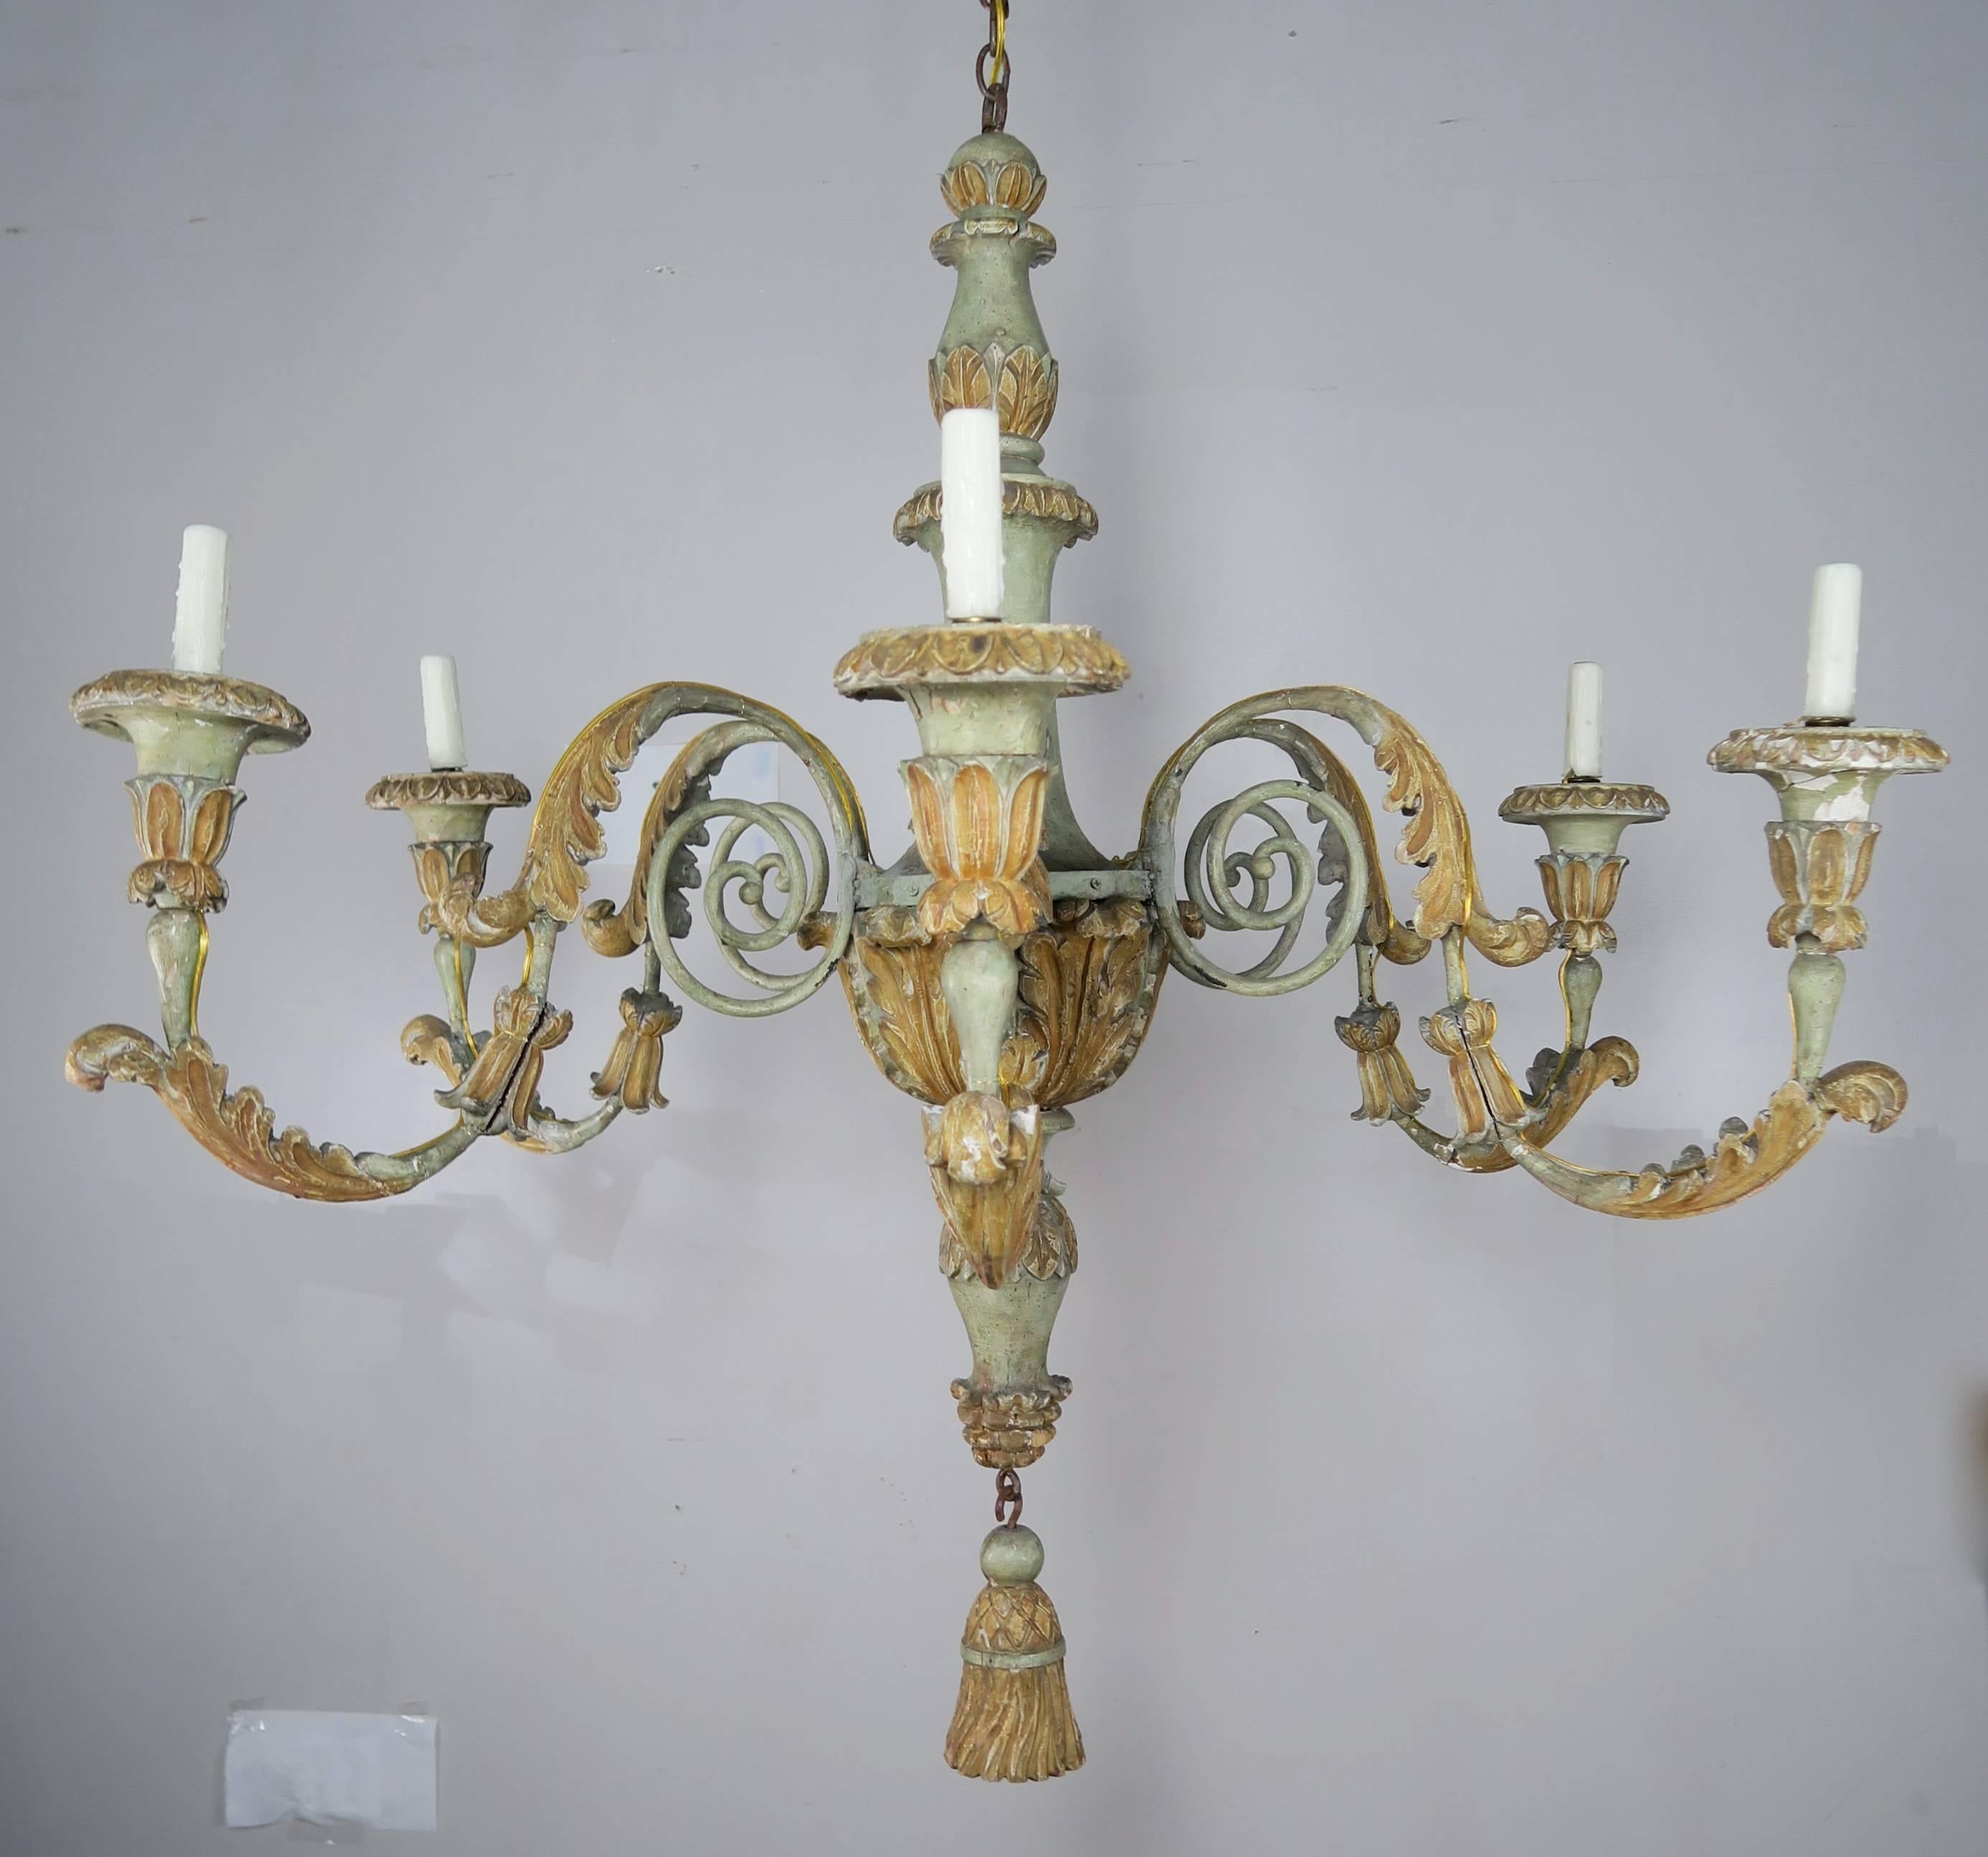 19th century grand scale Italian painted six-light wood and iron chandelier. The fixture has six scrolled iron arms with carved acanthus leaf detail on each. A large carved wood tassel hangs from the bottom. This chandelier has been newly rewired